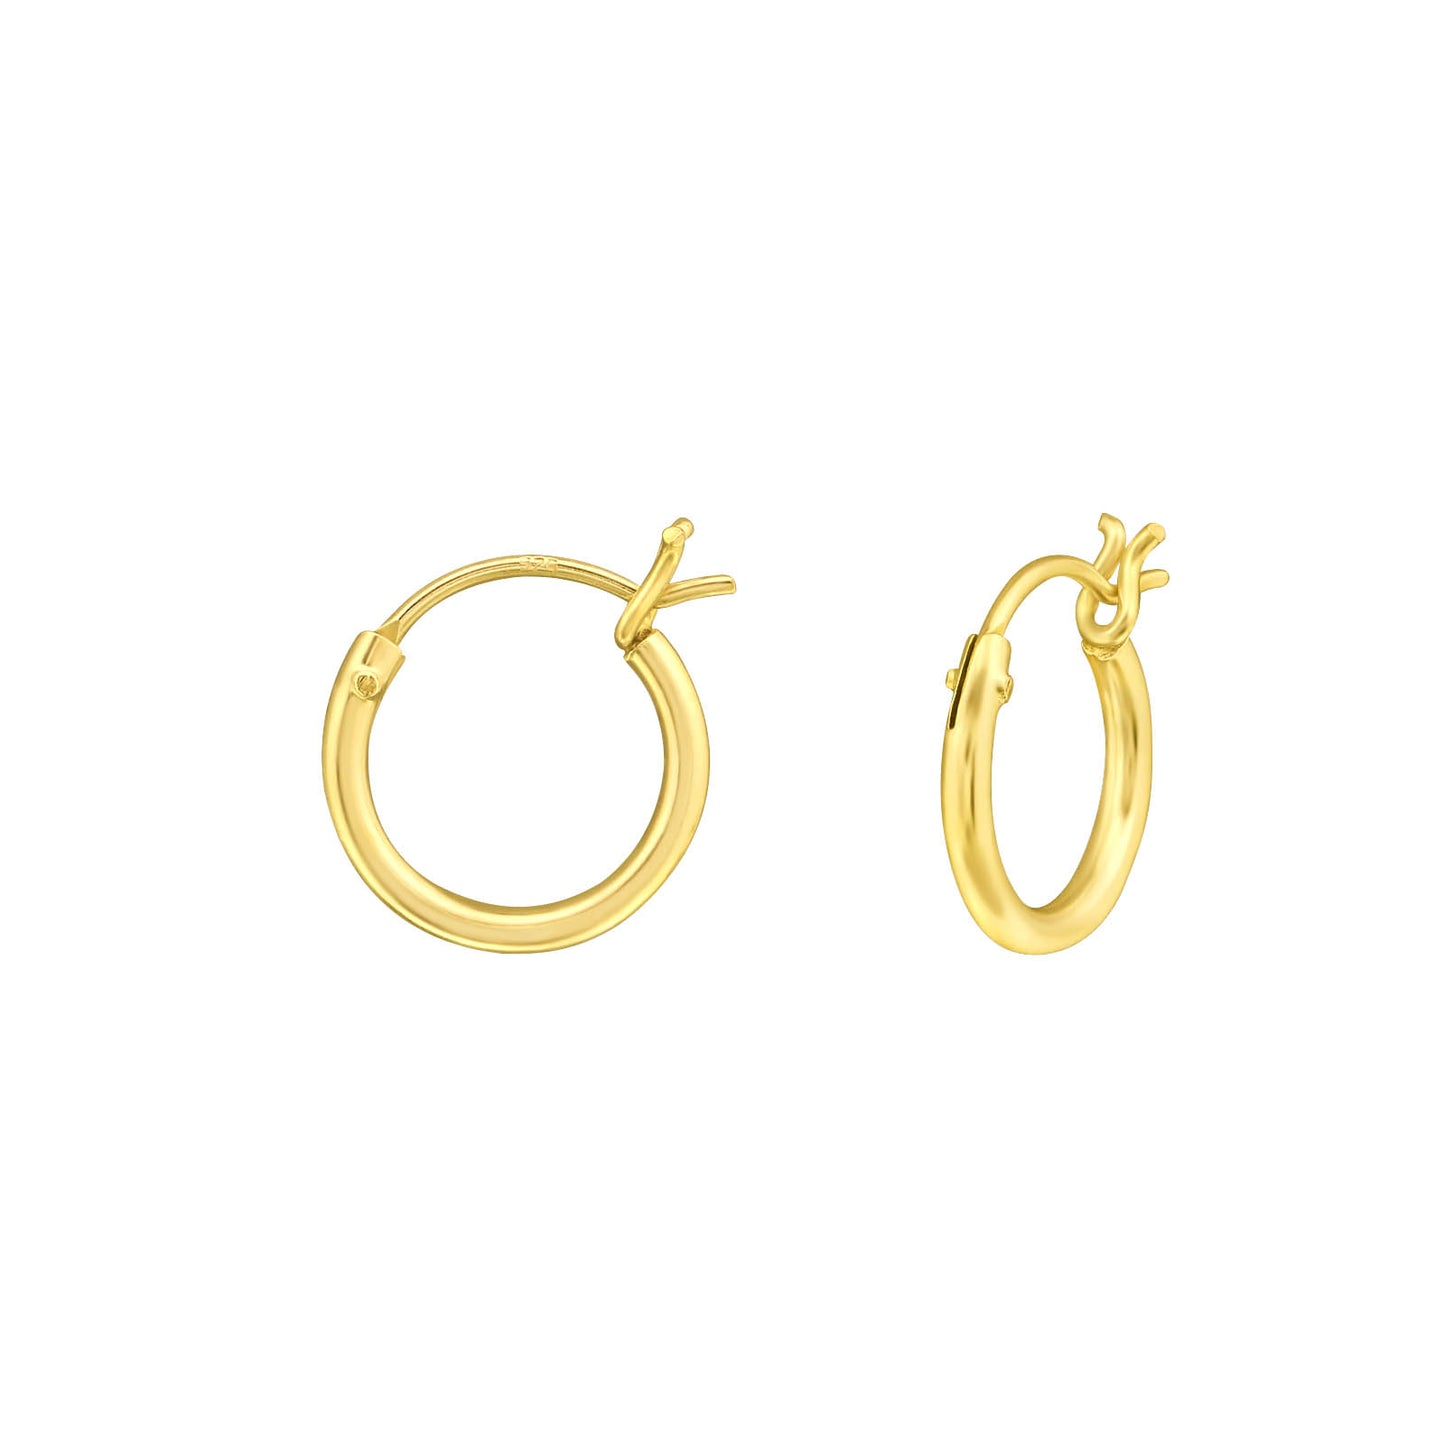 Gold 10mm Huggie Earrings - Sterling silver with 14k gold plating